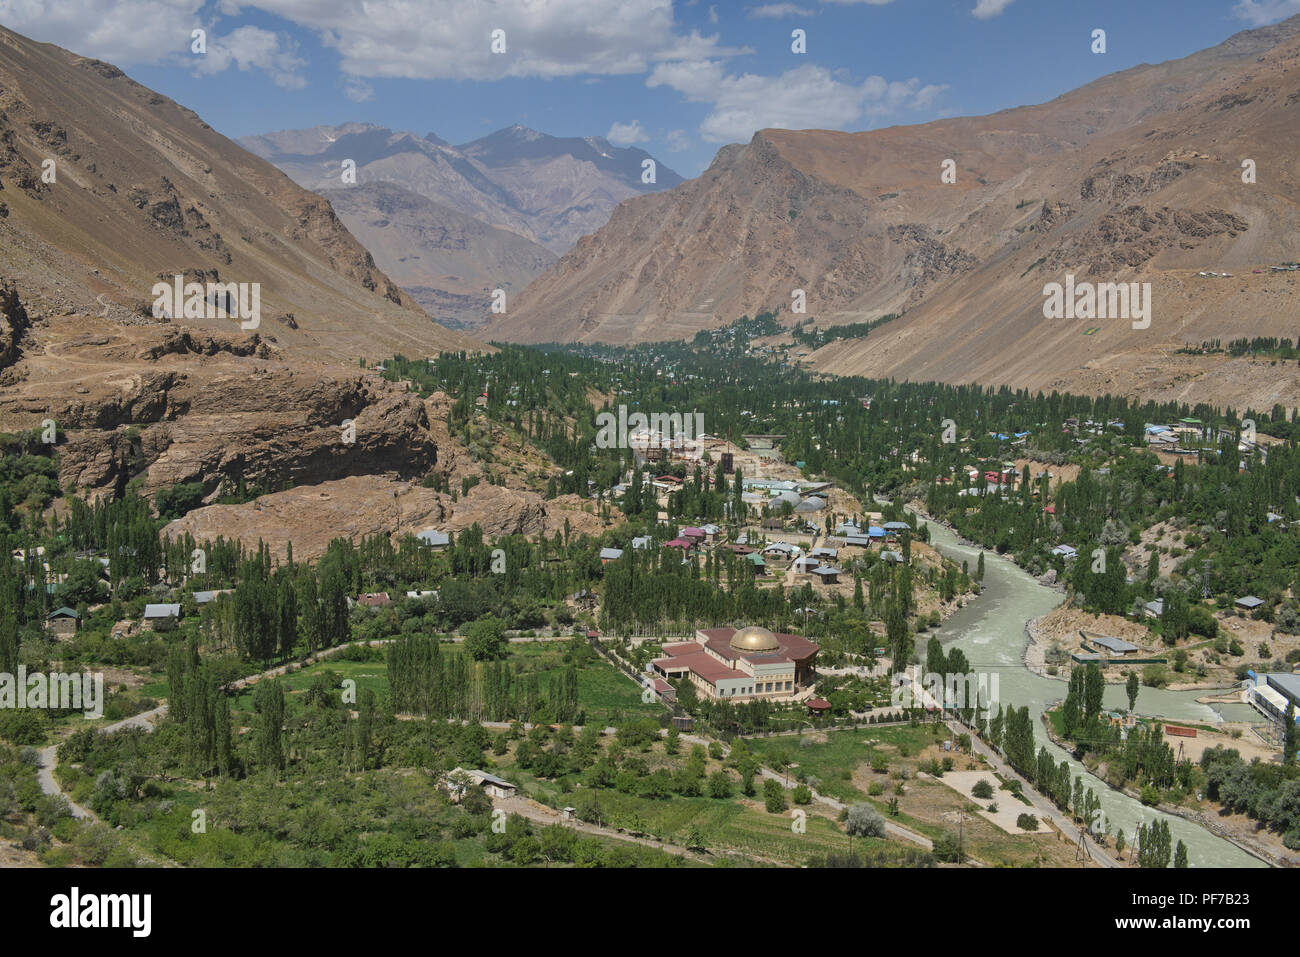 The city of Khorog seen from above, with Afghanistan in the background, Tajikistan Stock Photo